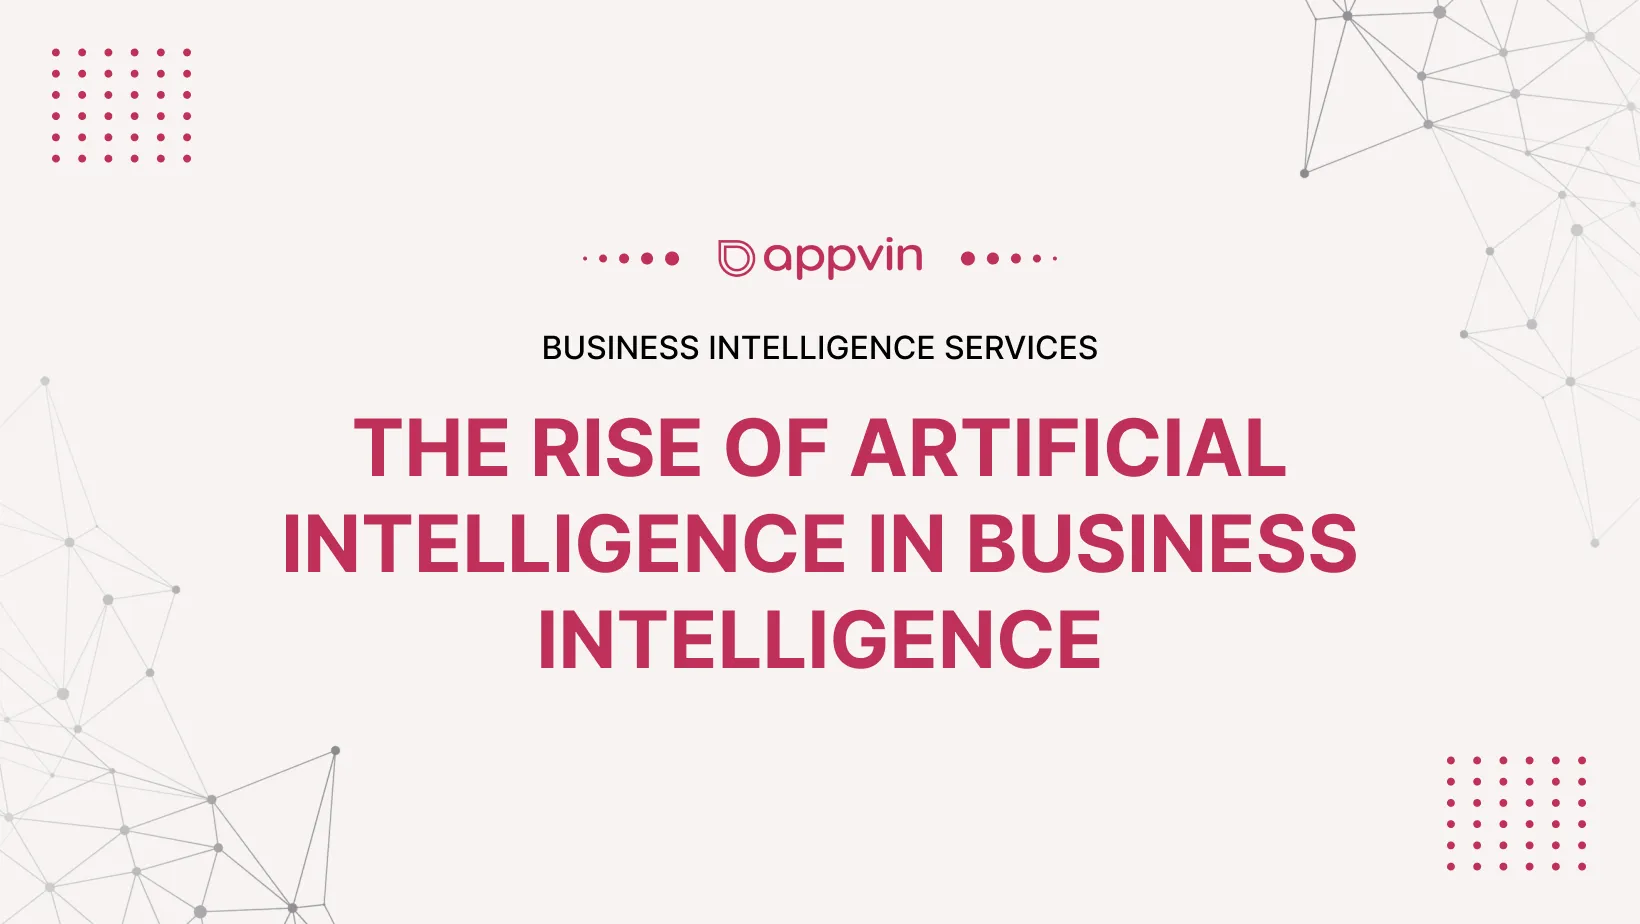 The Rise of Artificial Intelligence in Business Intelligence